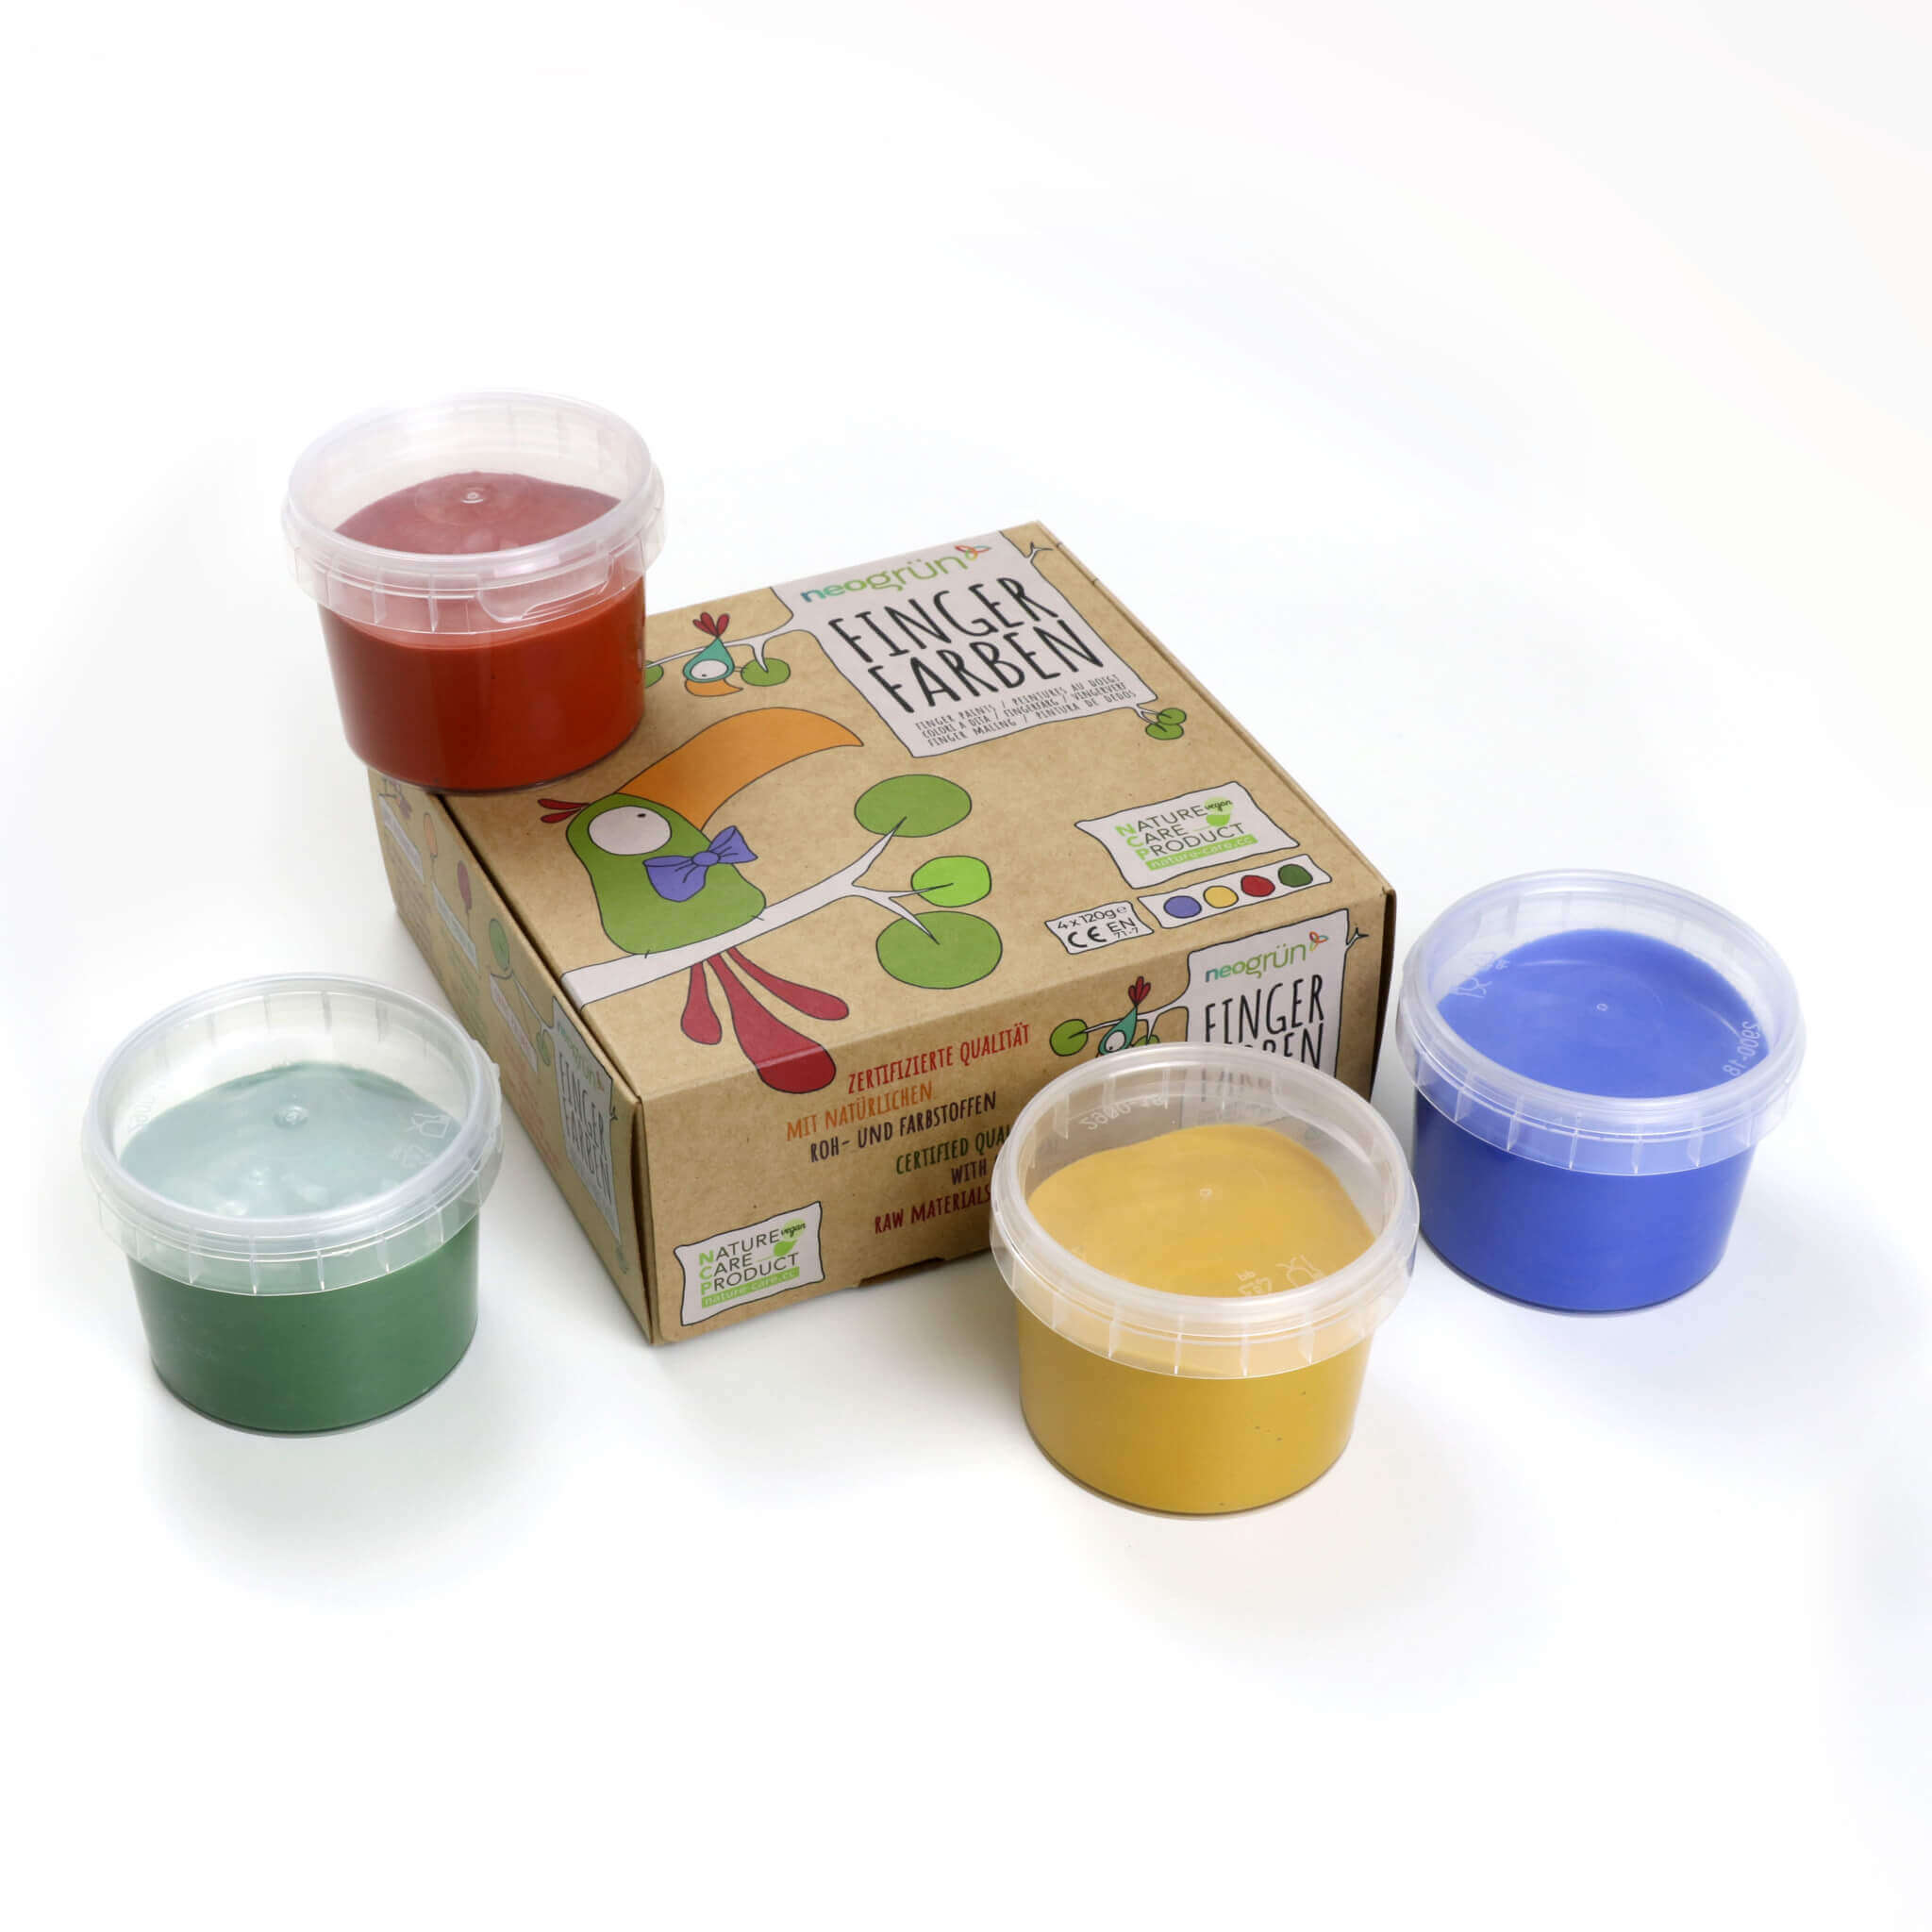 The first eco-certified finger paints and modeling clay from neogrün